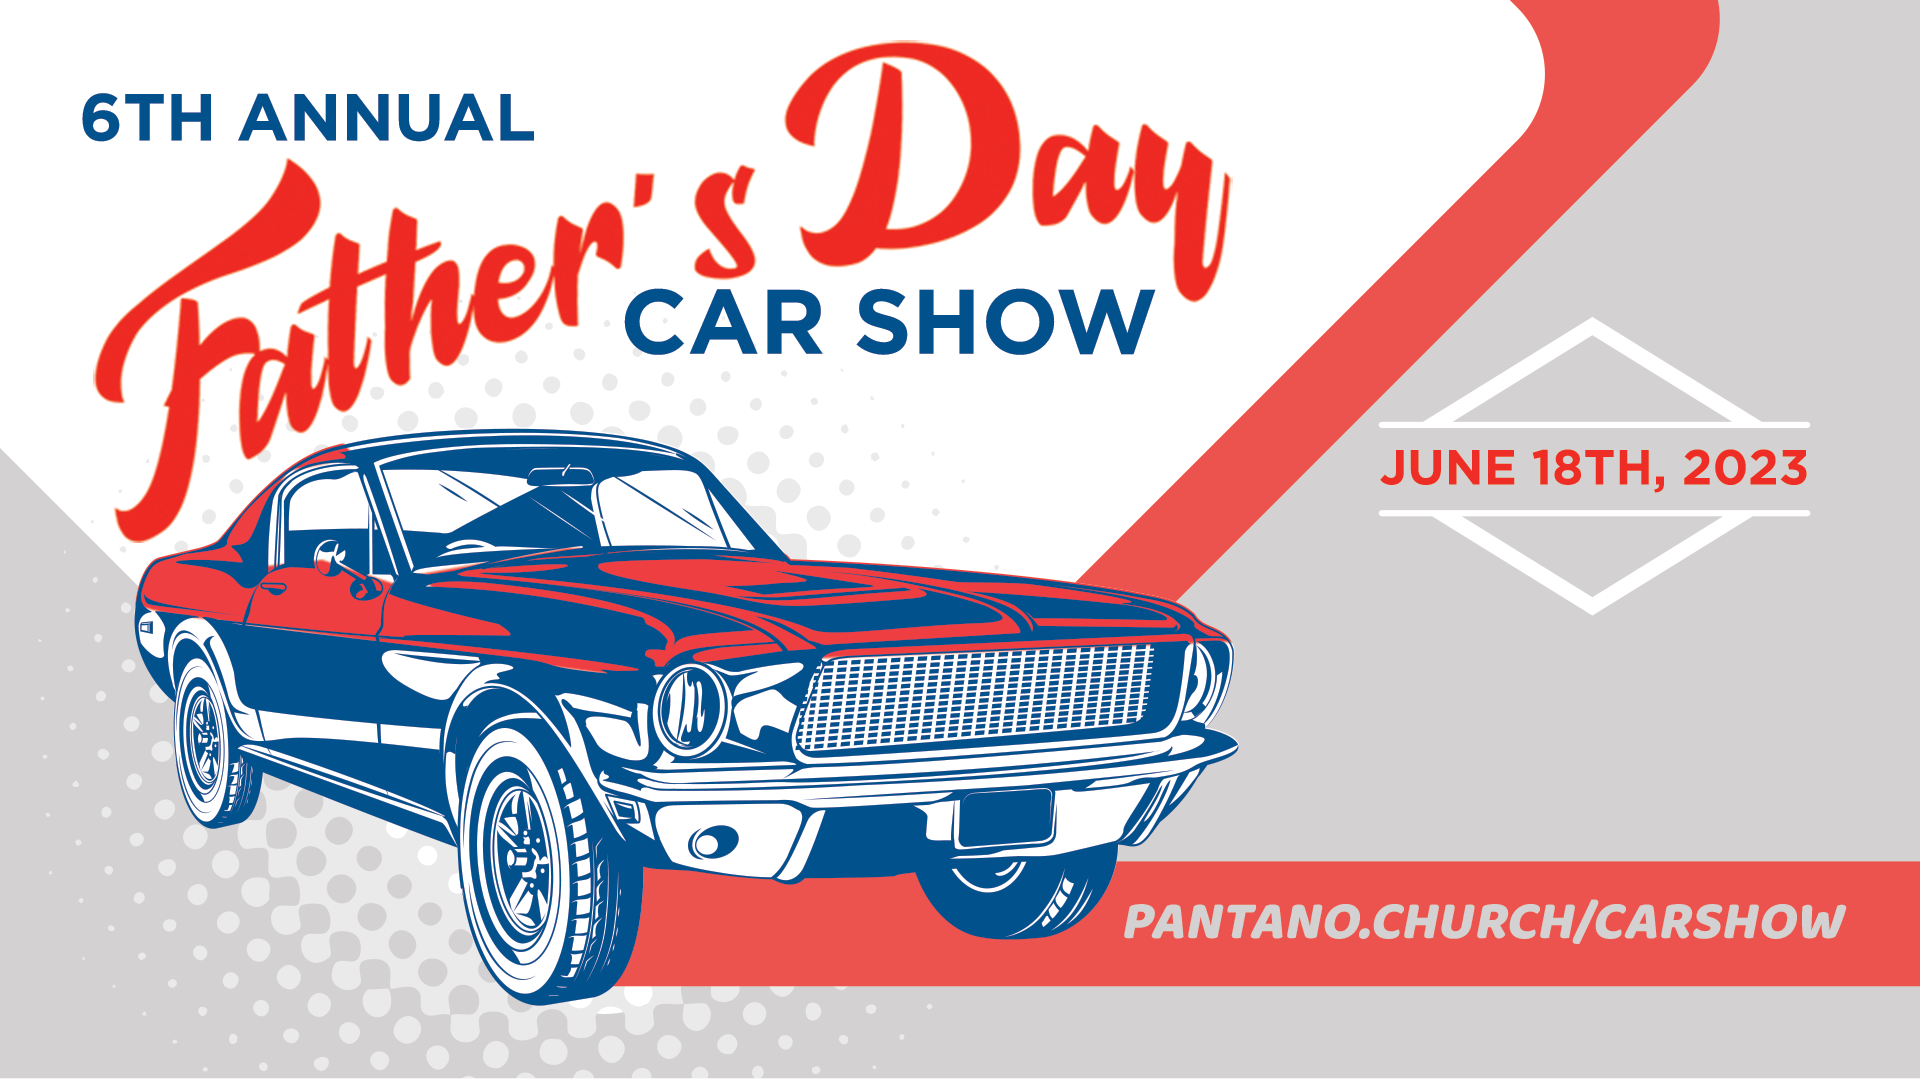 Image: 6th Annual Father’s Day Car Show 2023